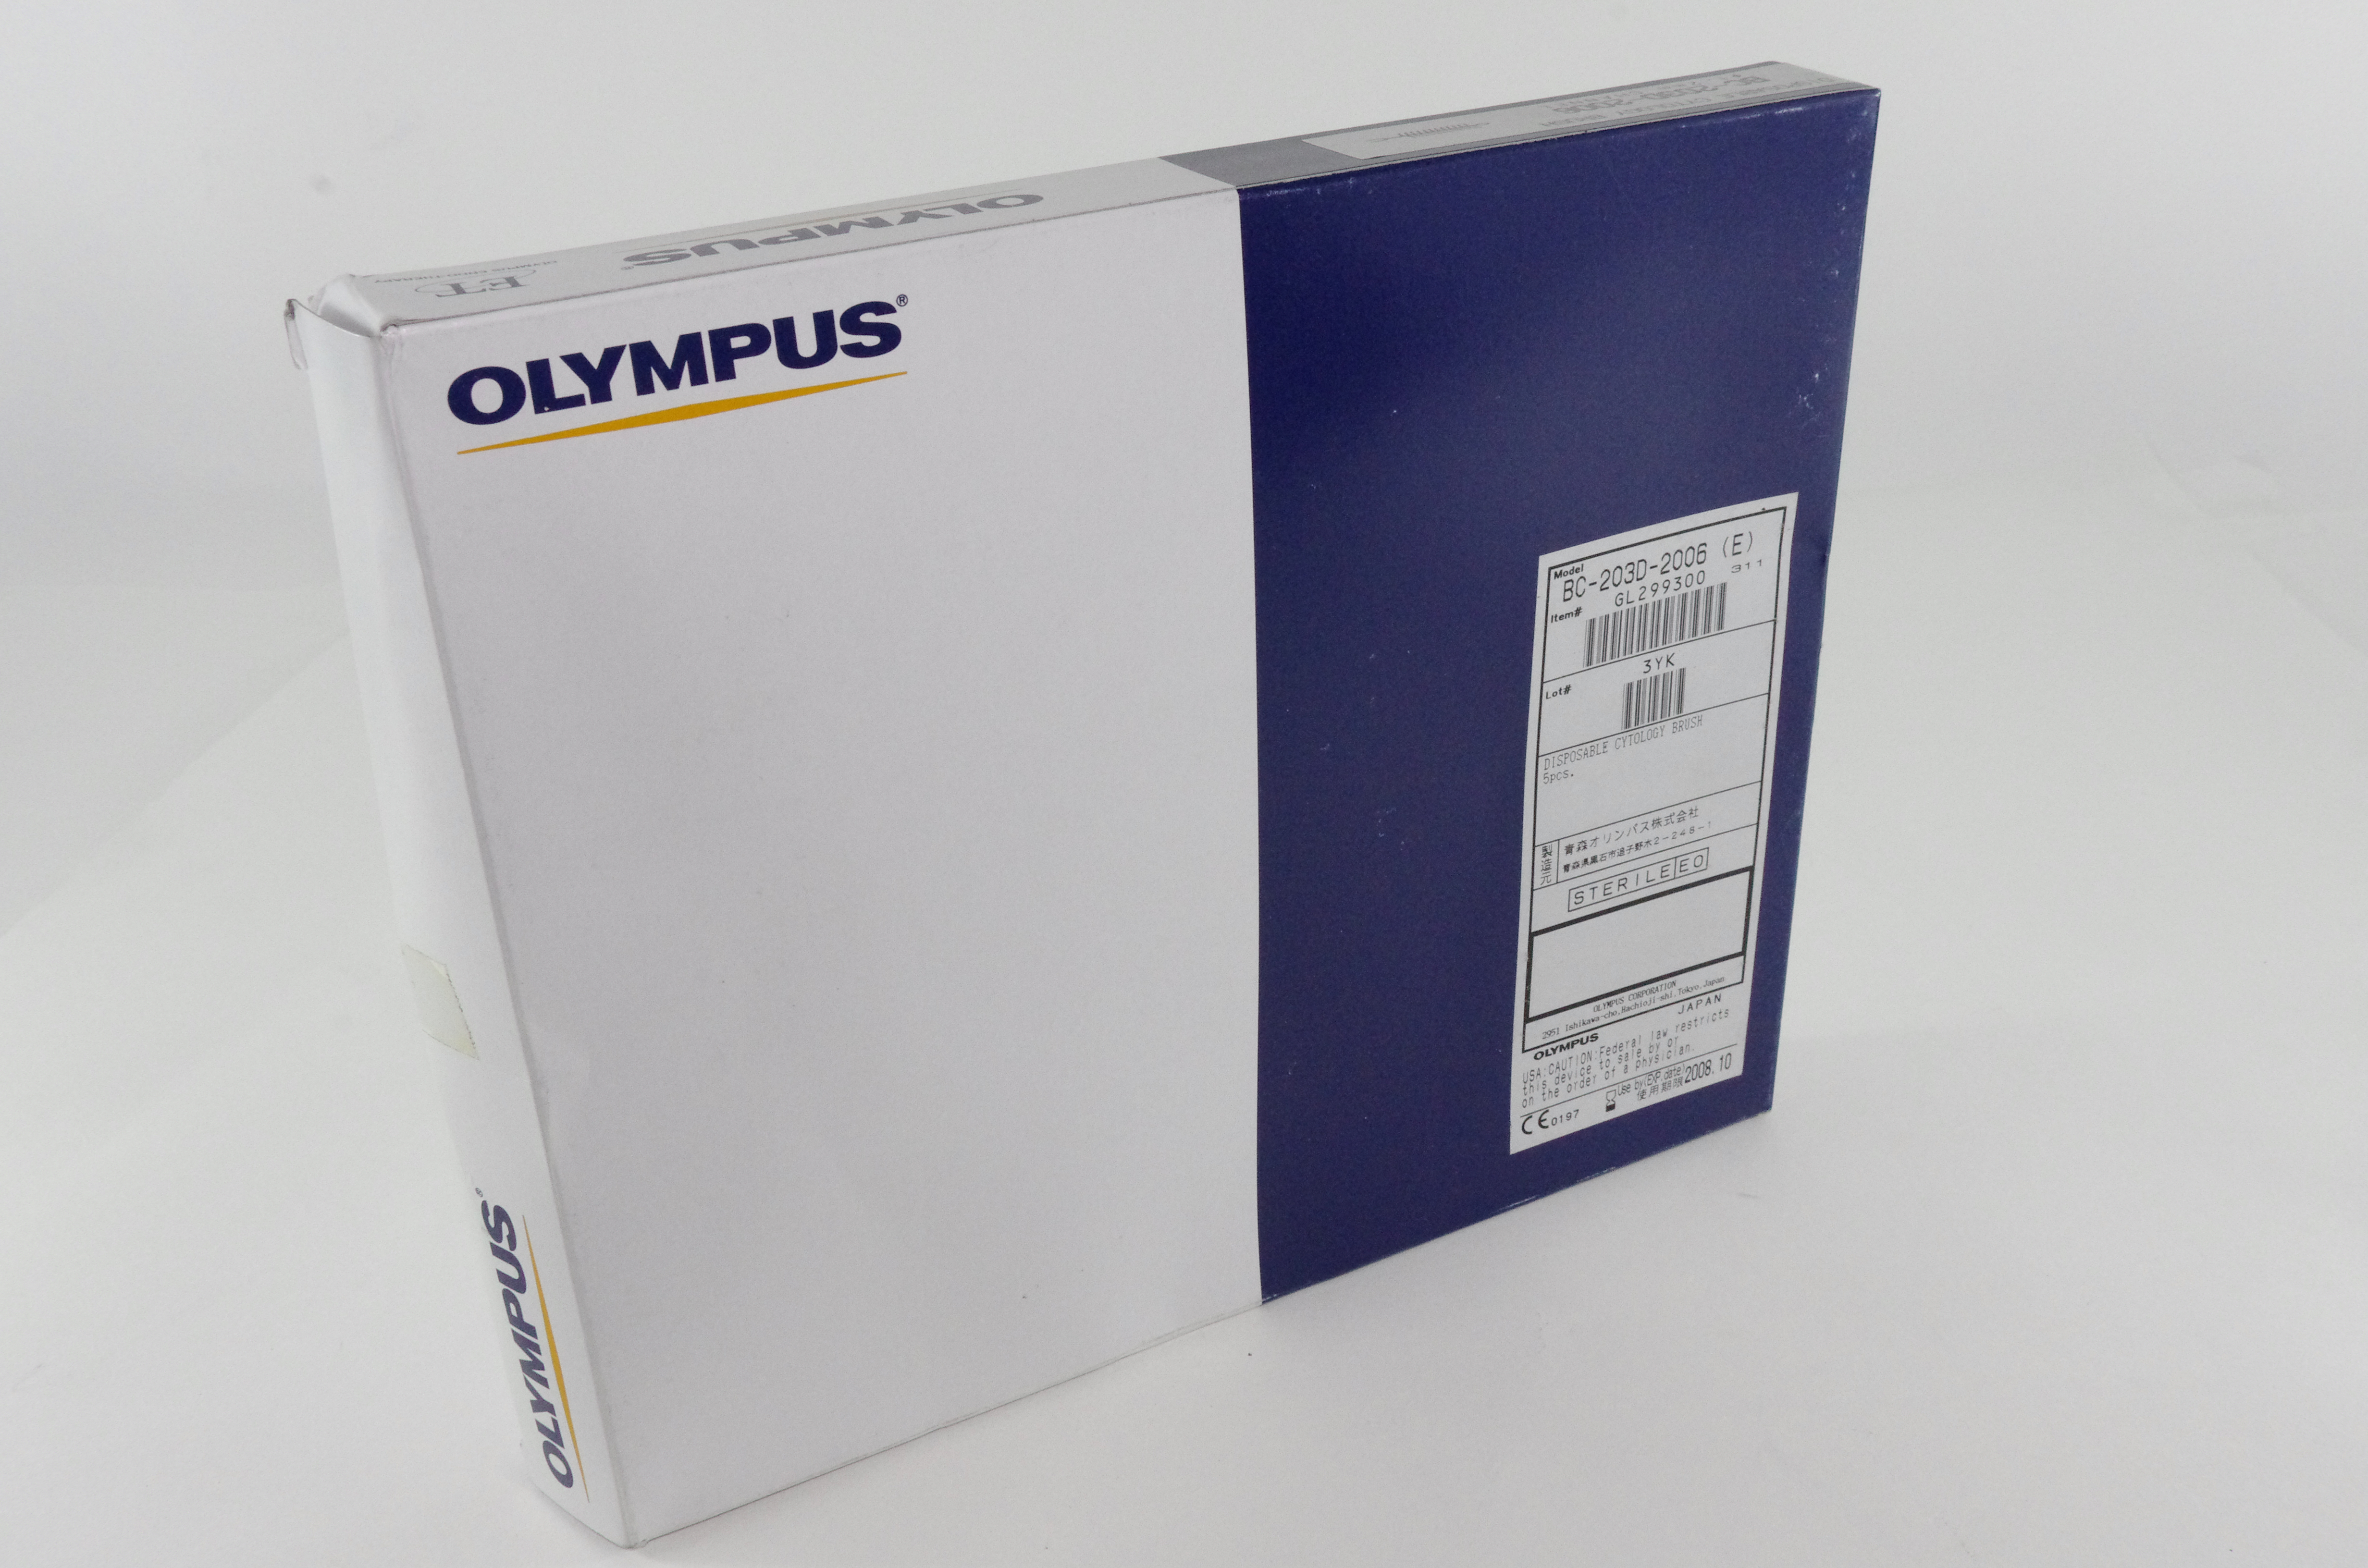 [Out-of-Date] Olympus Disposable Cytology Brush - BC-203D-2006